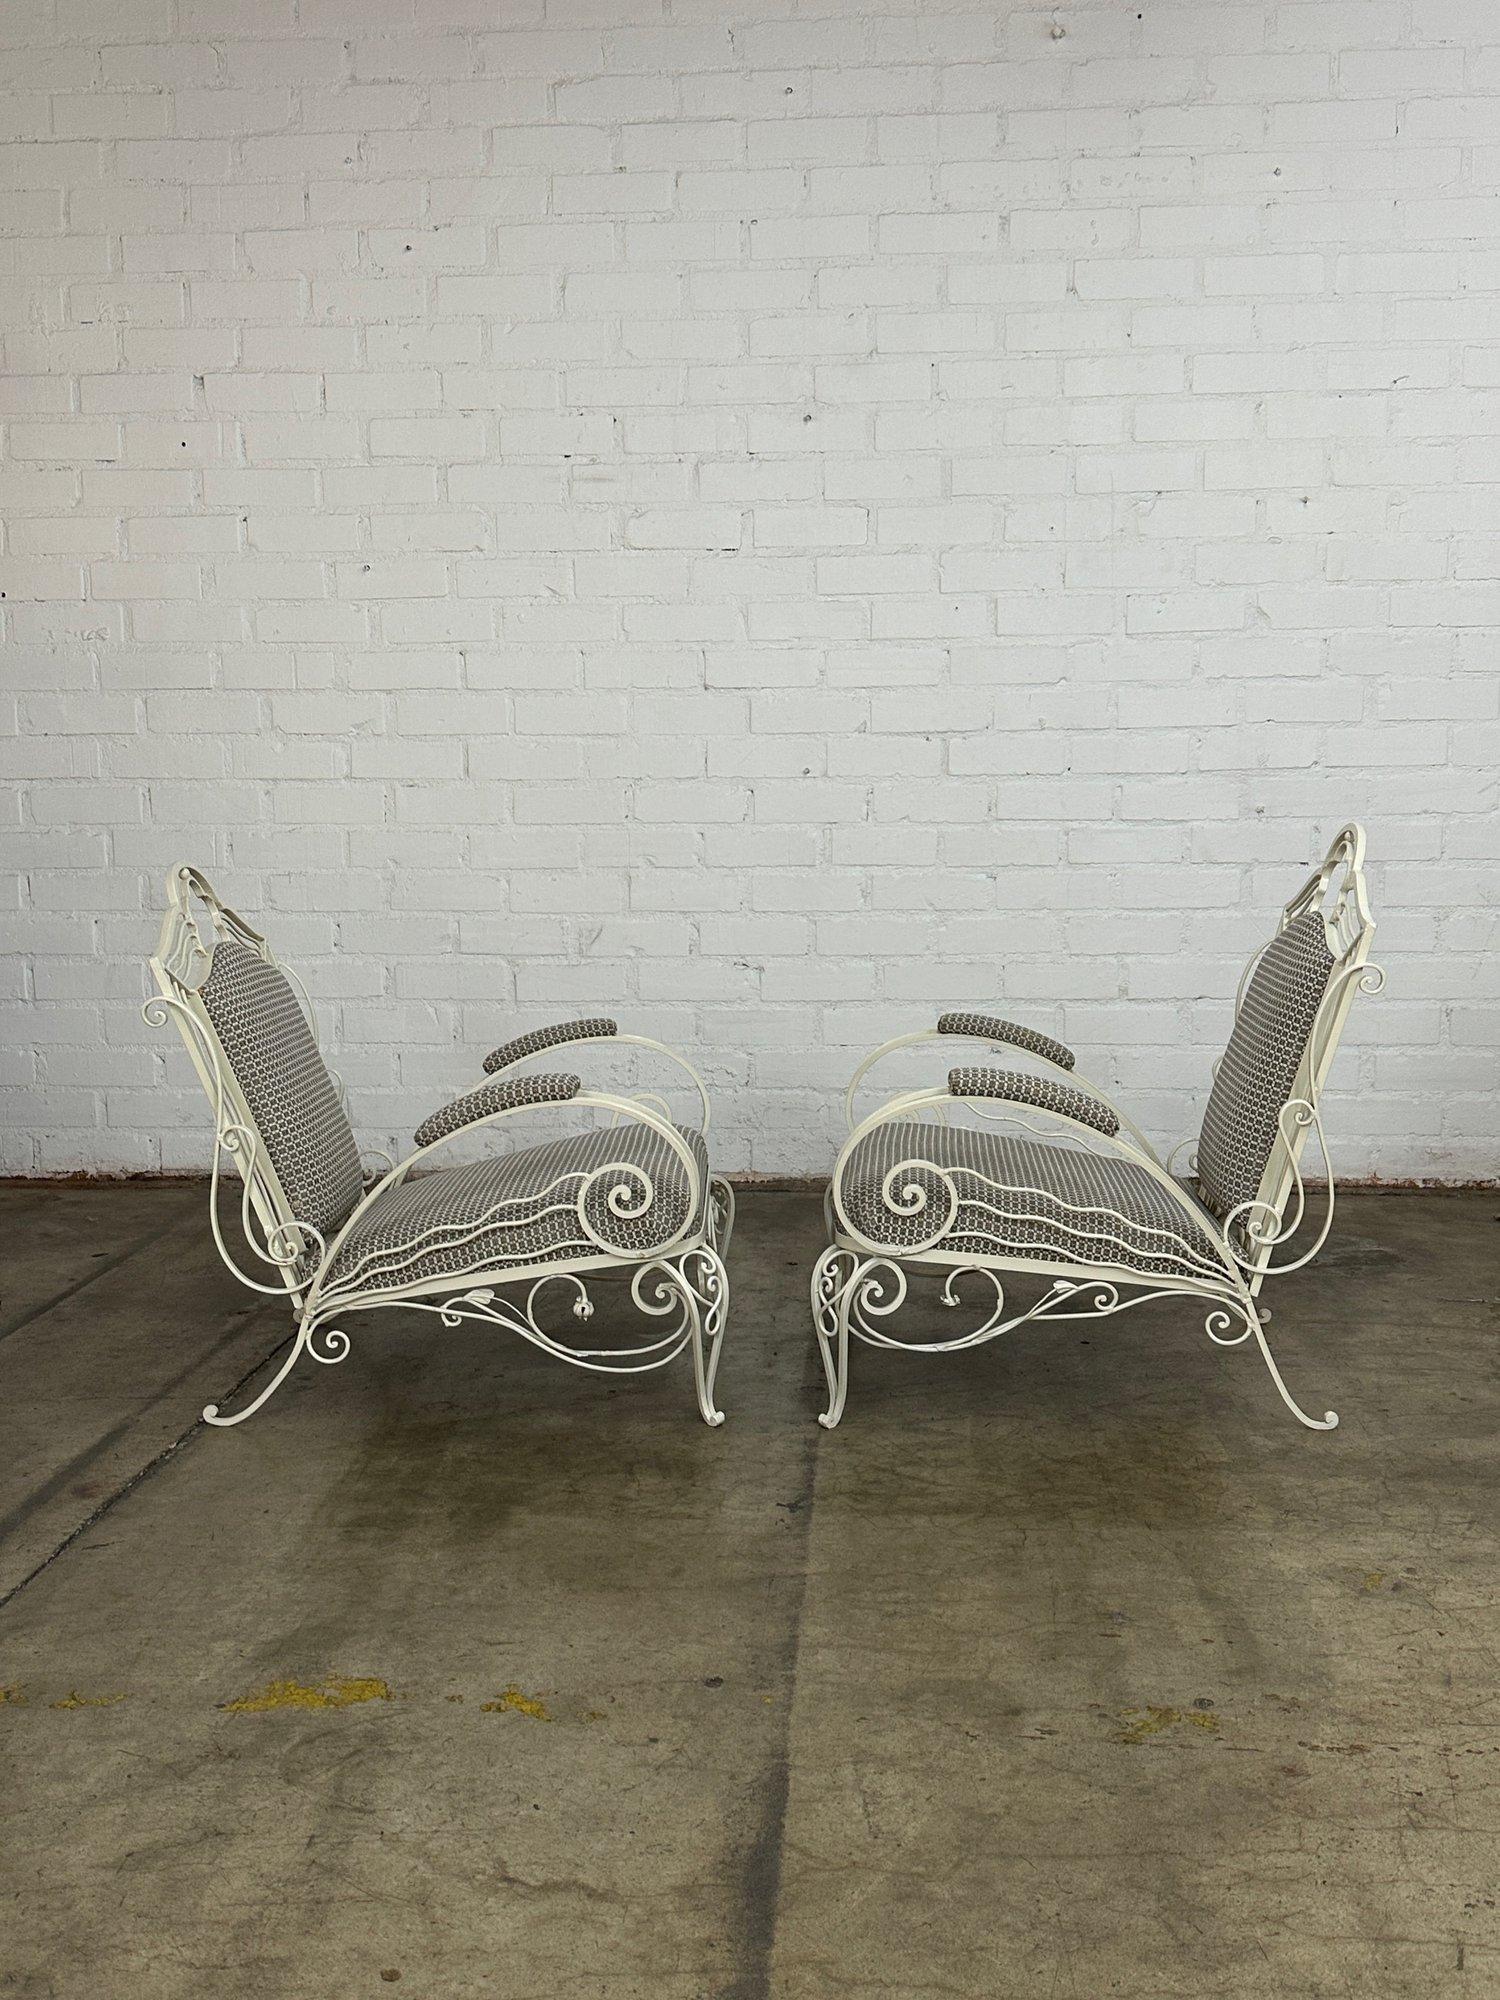 Restored French Iron chairs - Pair For Sale 5